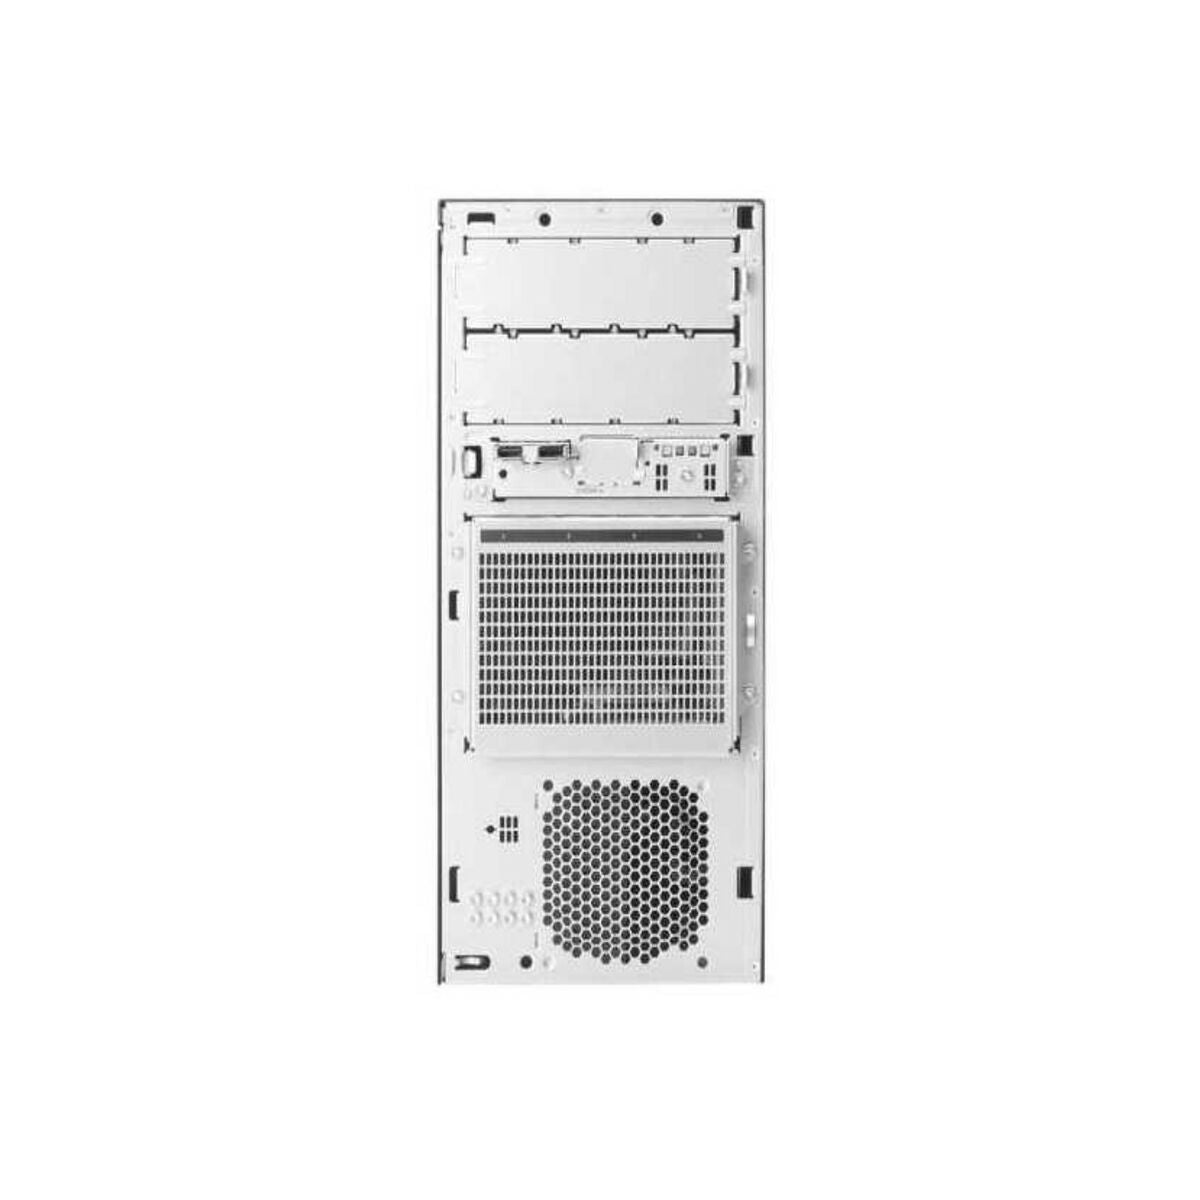 Server HPE ML30 GEN11 Intel Xeon E-2414 16 GB RAM, HPE, Computing, server-hpe-ml30-gen11-intel-xeon-e-2414-16-gb-ram, Brand_HPE, category-reference-2609, category-reference-2791, category-reference-2799, category-reference-t-19685, category-reference-t-19905, computers / components, Condition_NEW, office, Price_+ 1000, Teleworking, RiotNook